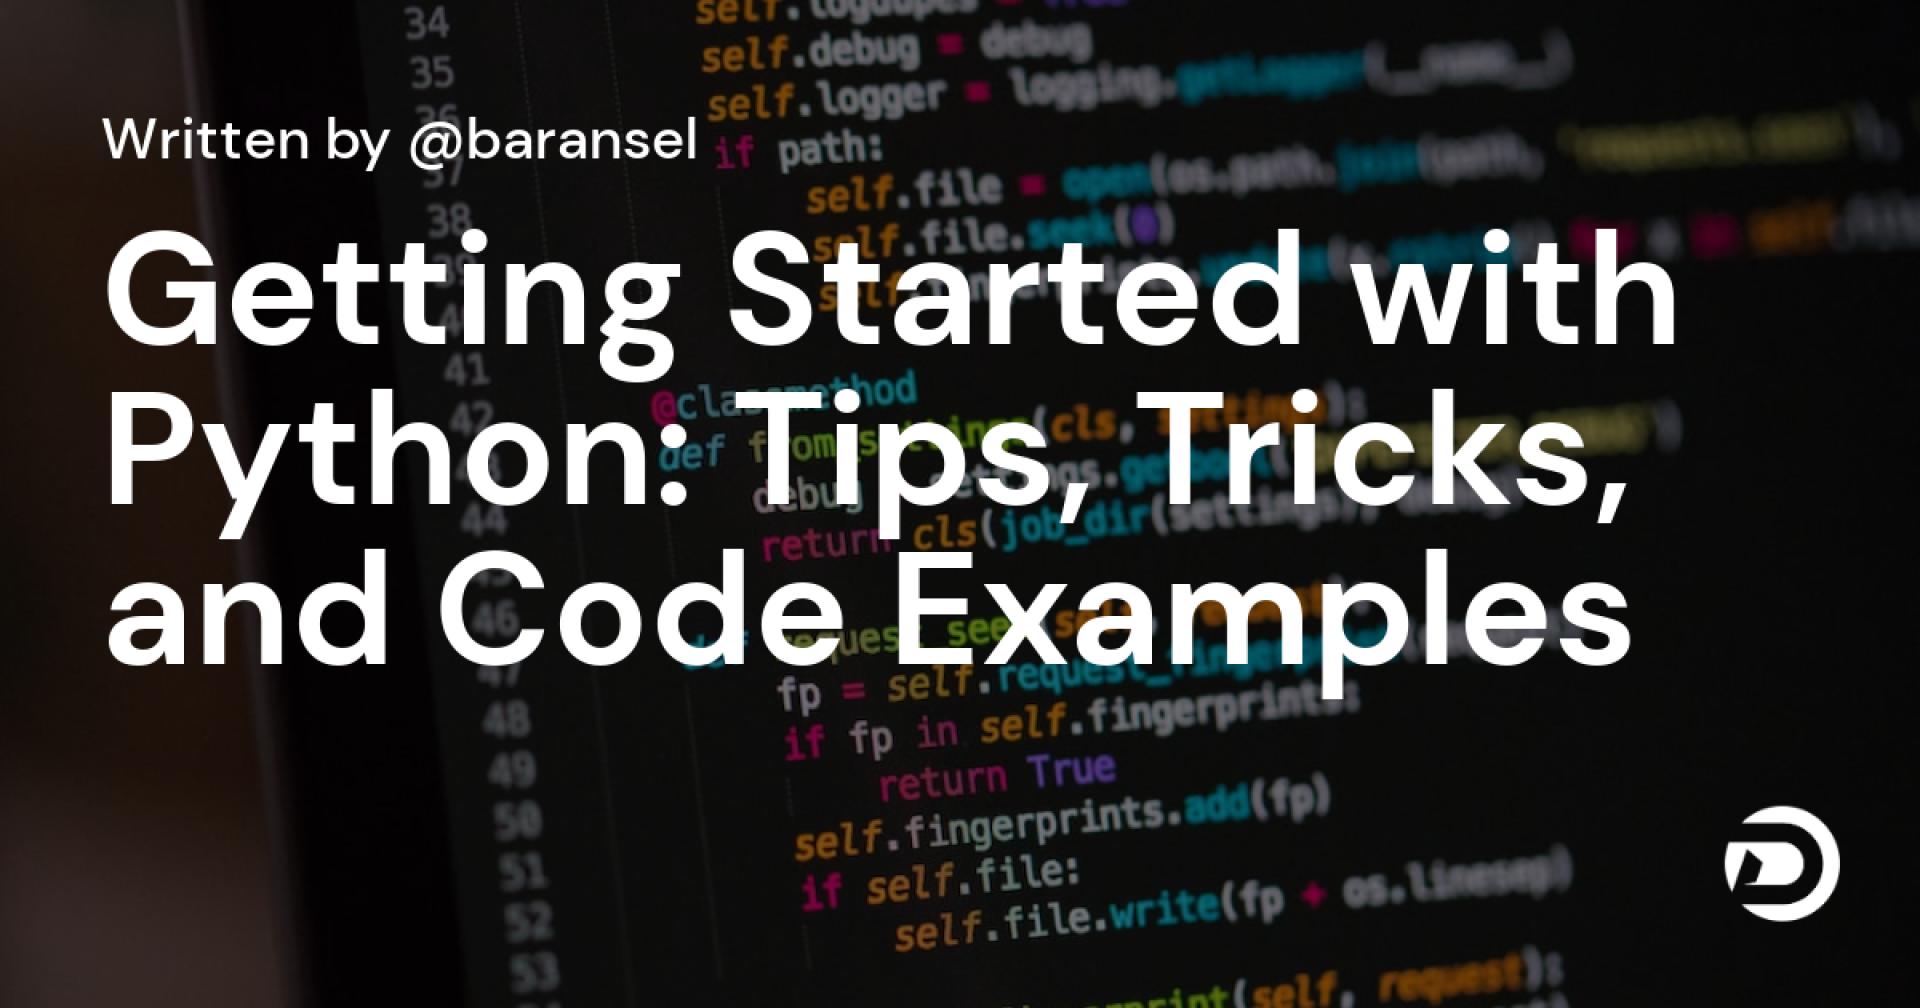 Getting Started with Python: Tips, Tricks, and Code Examples